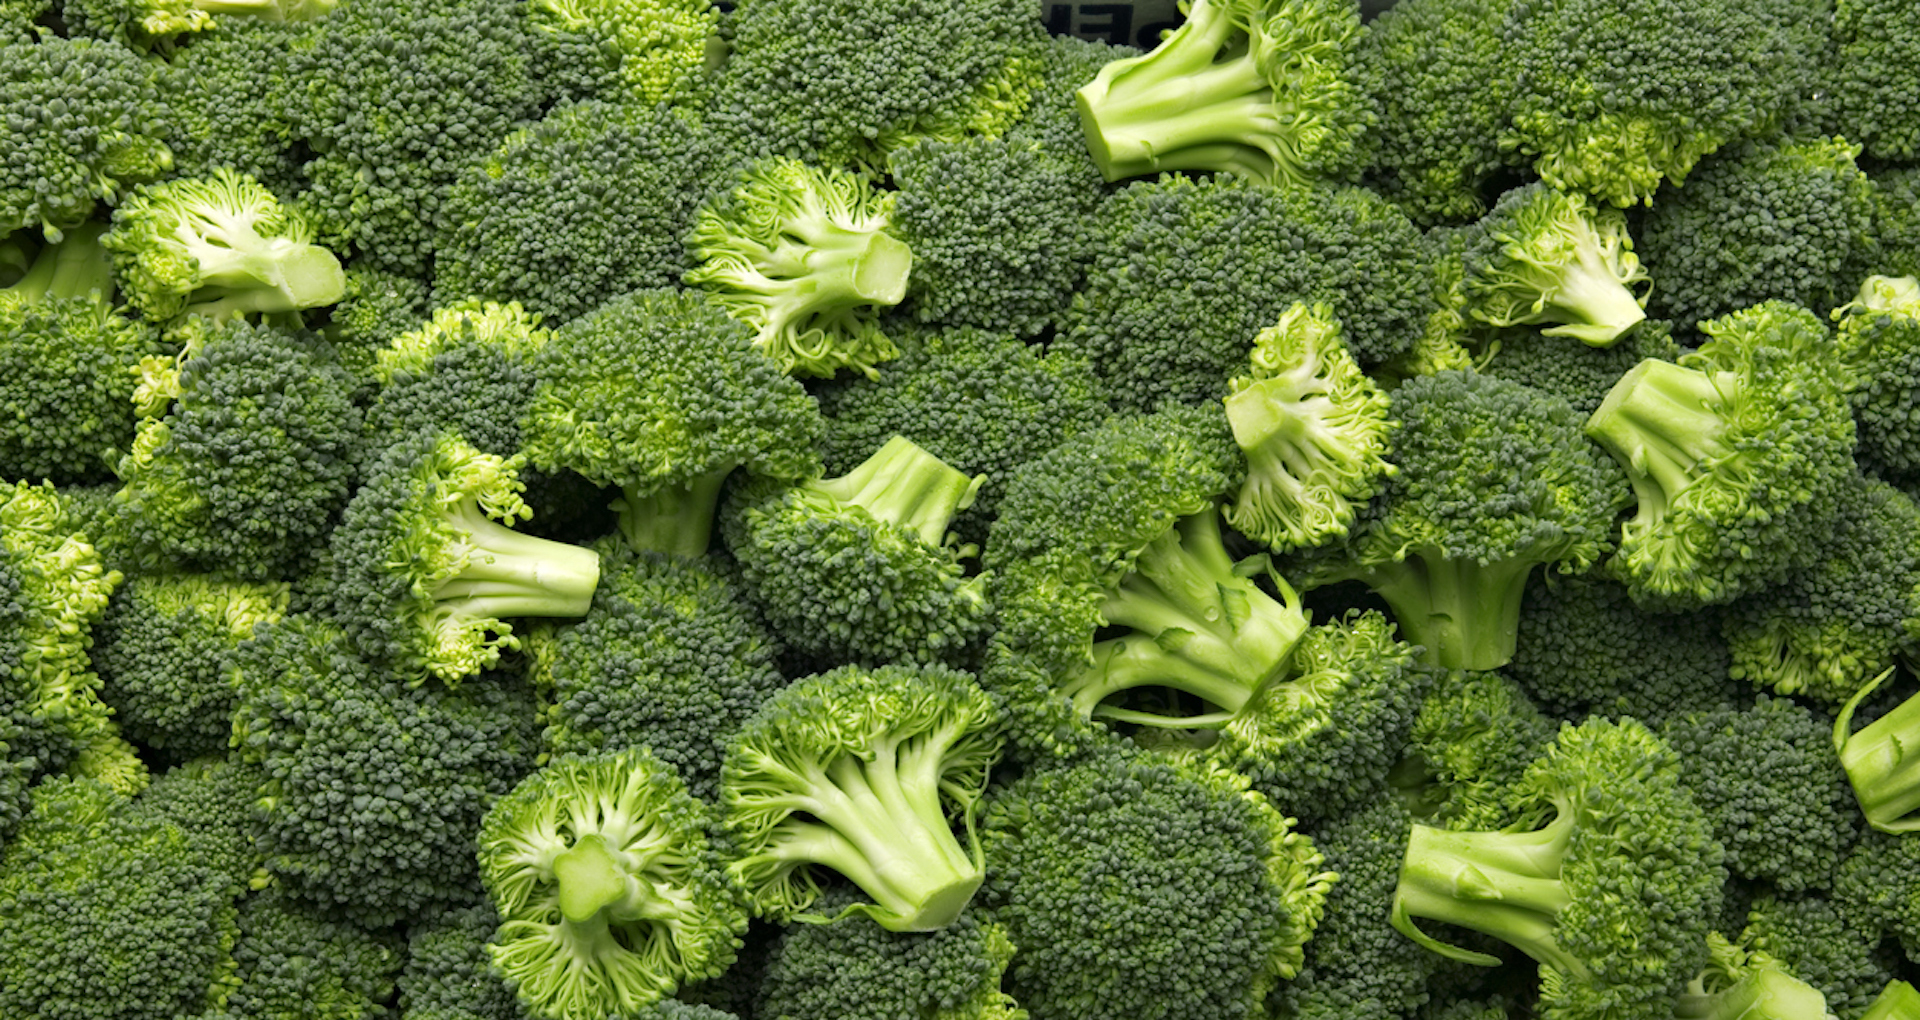 An enormous amount of broccoli